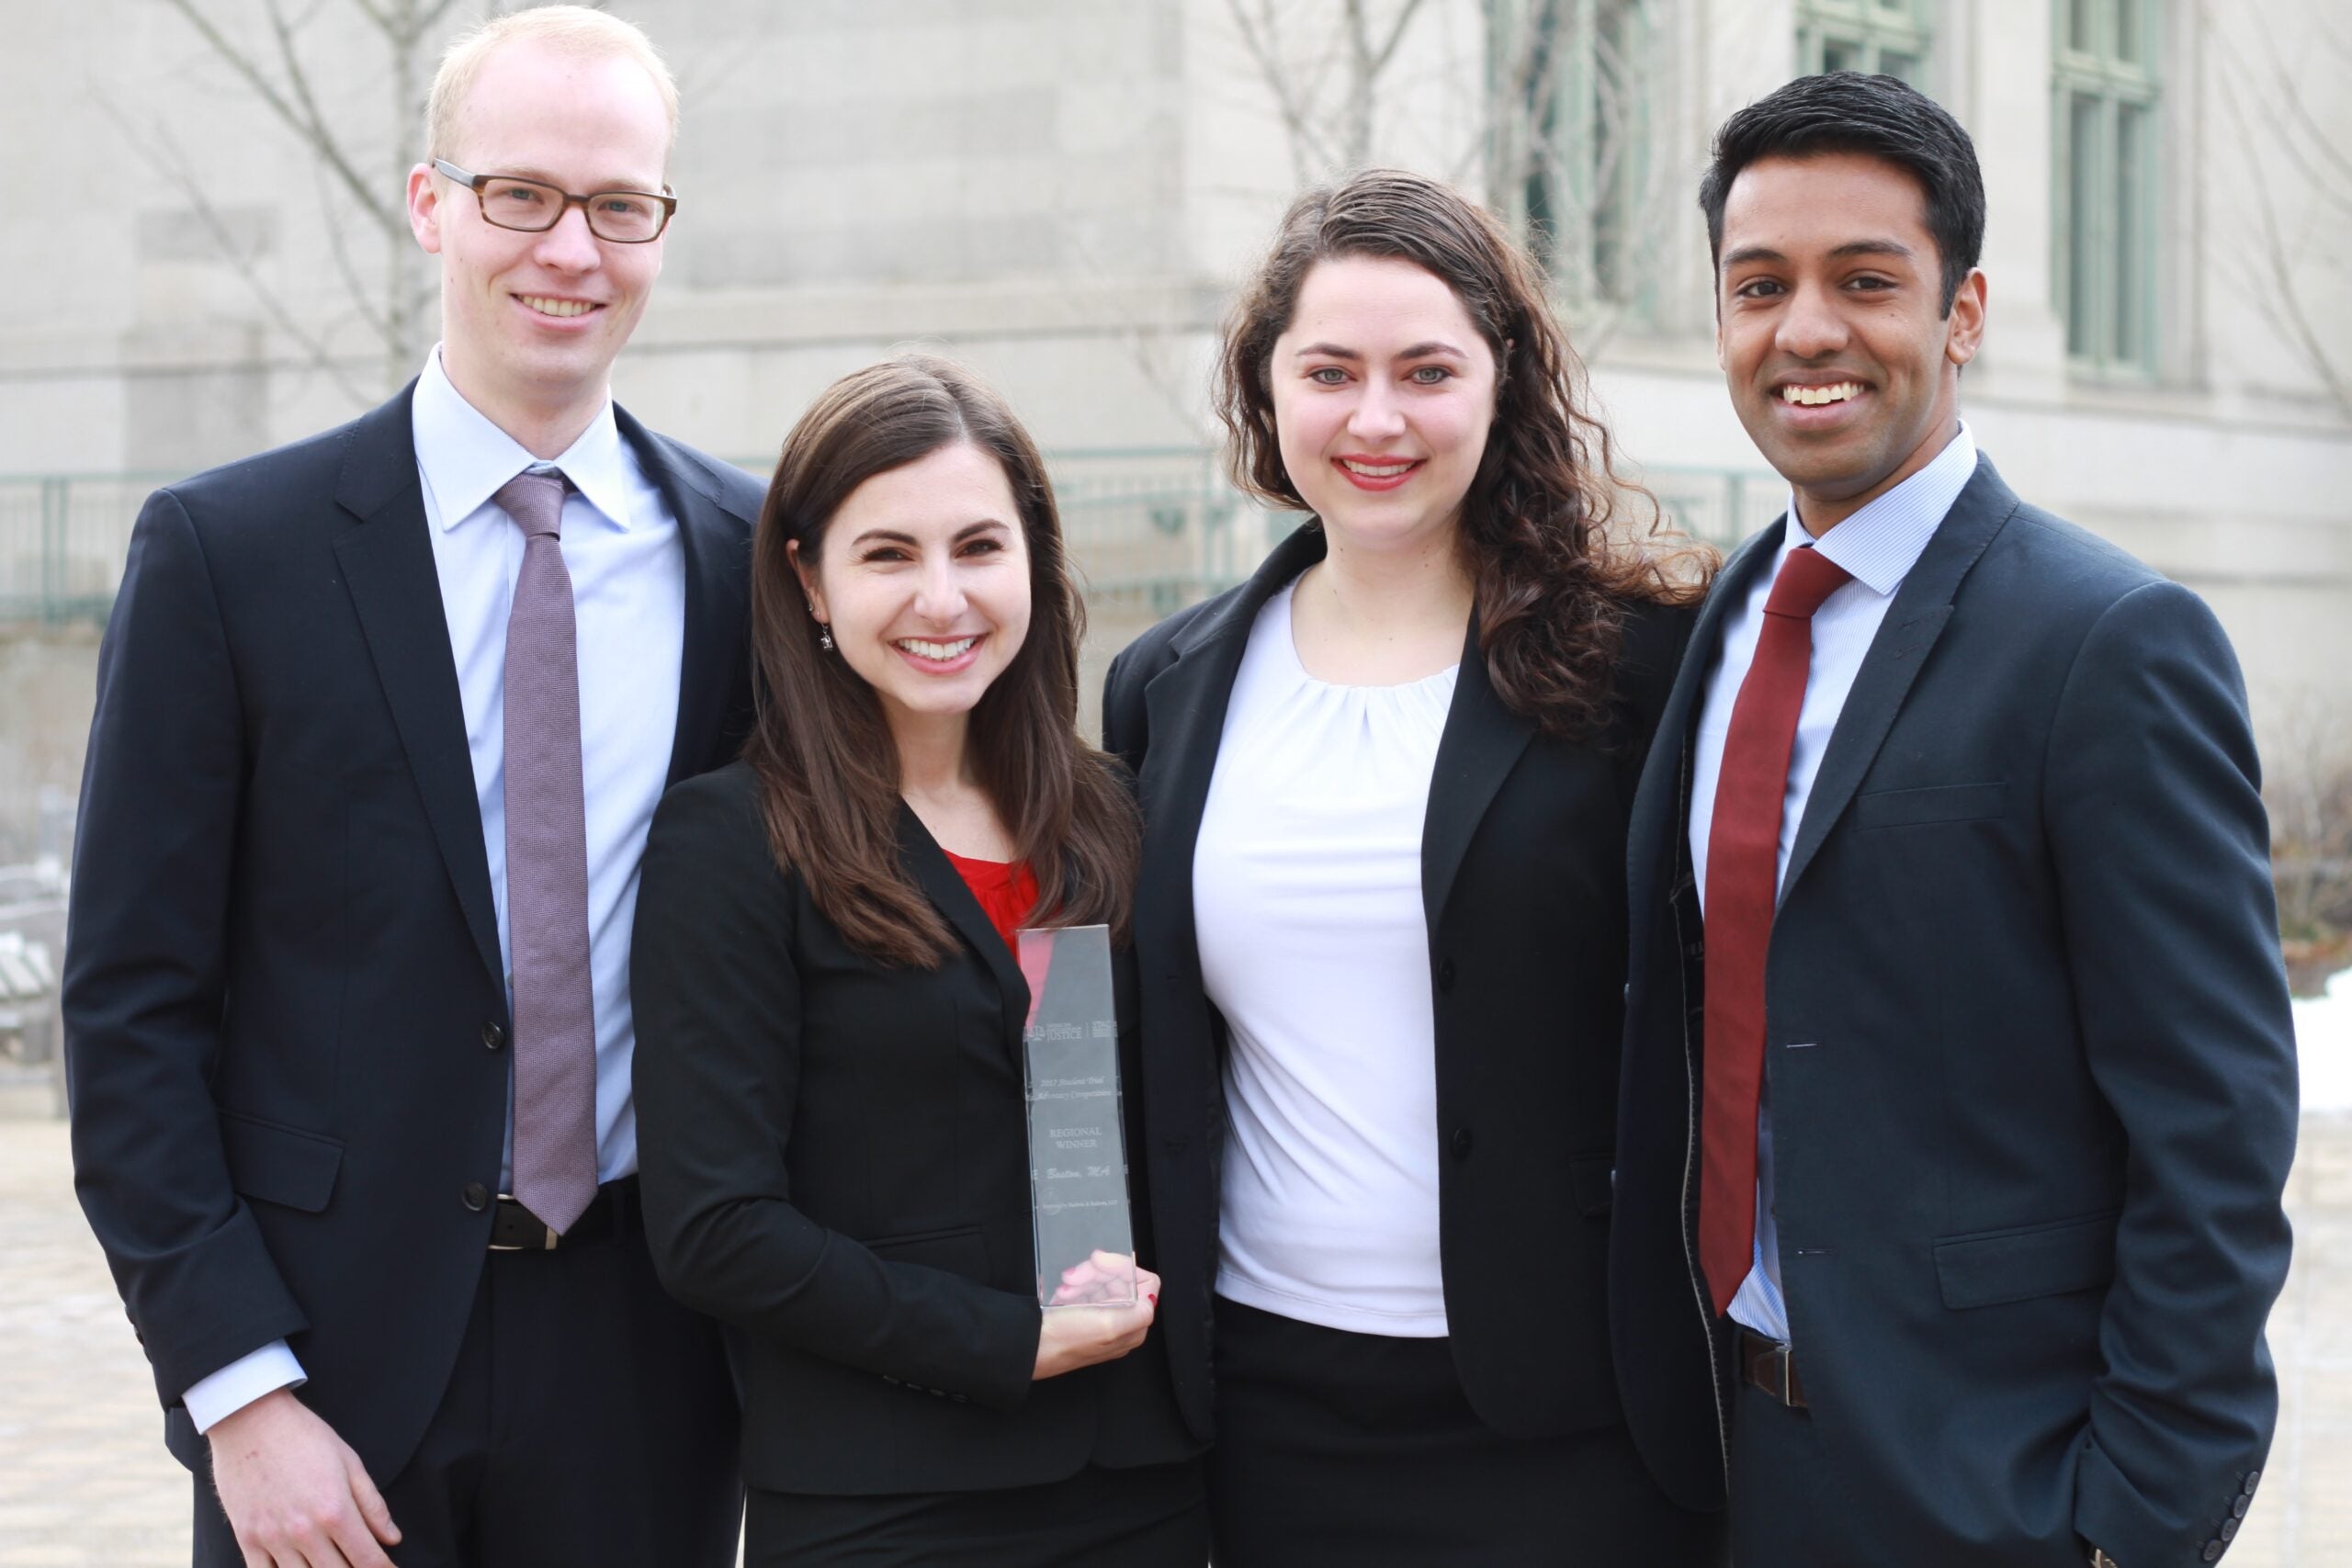 HLS 2017 National Student Trial Advocacy Competition team